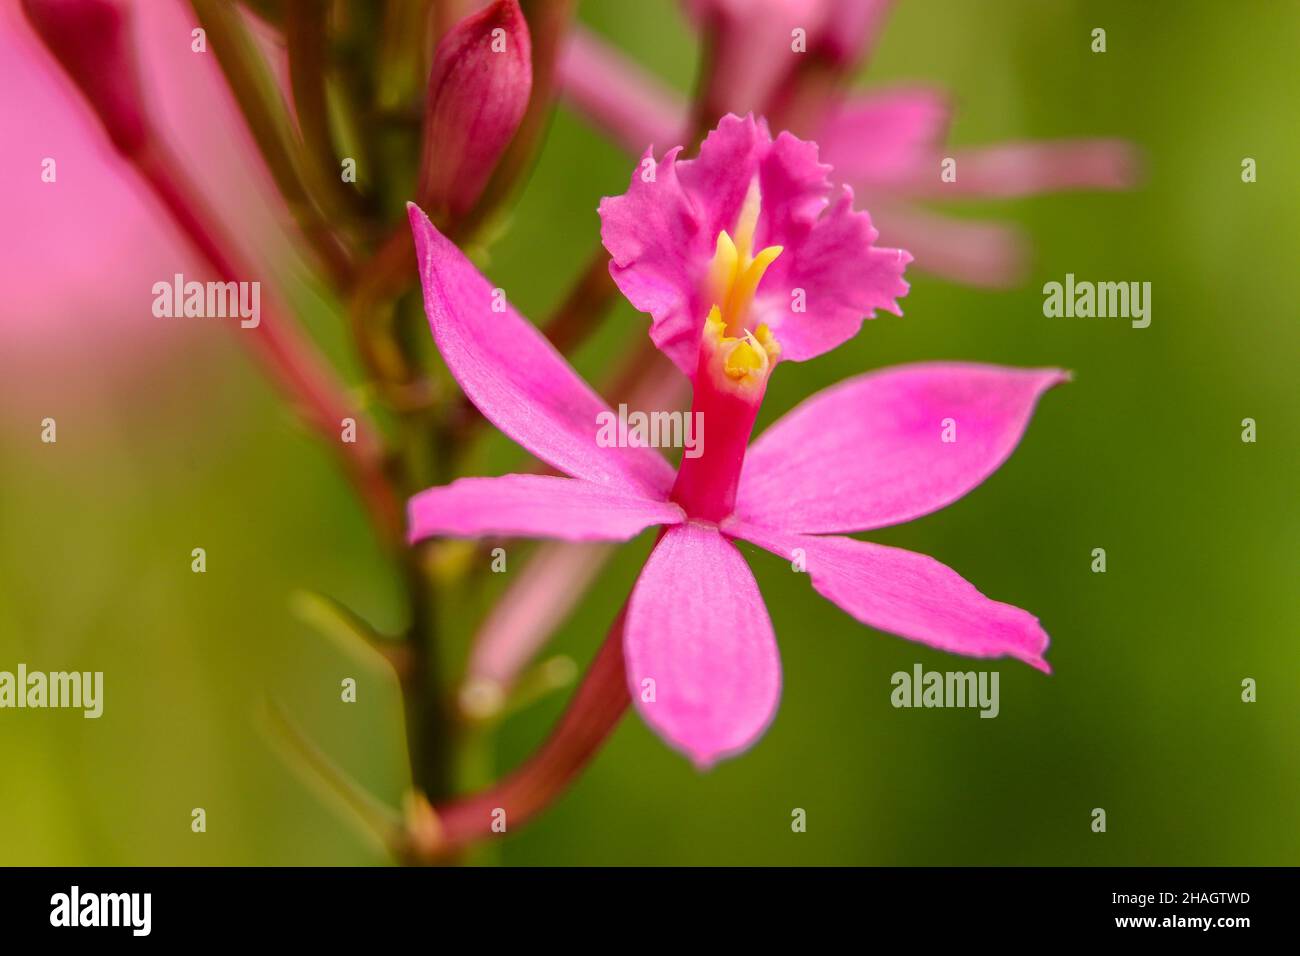 Closeup shot of pink epidendrum orchids against a blurred background Stock Photo